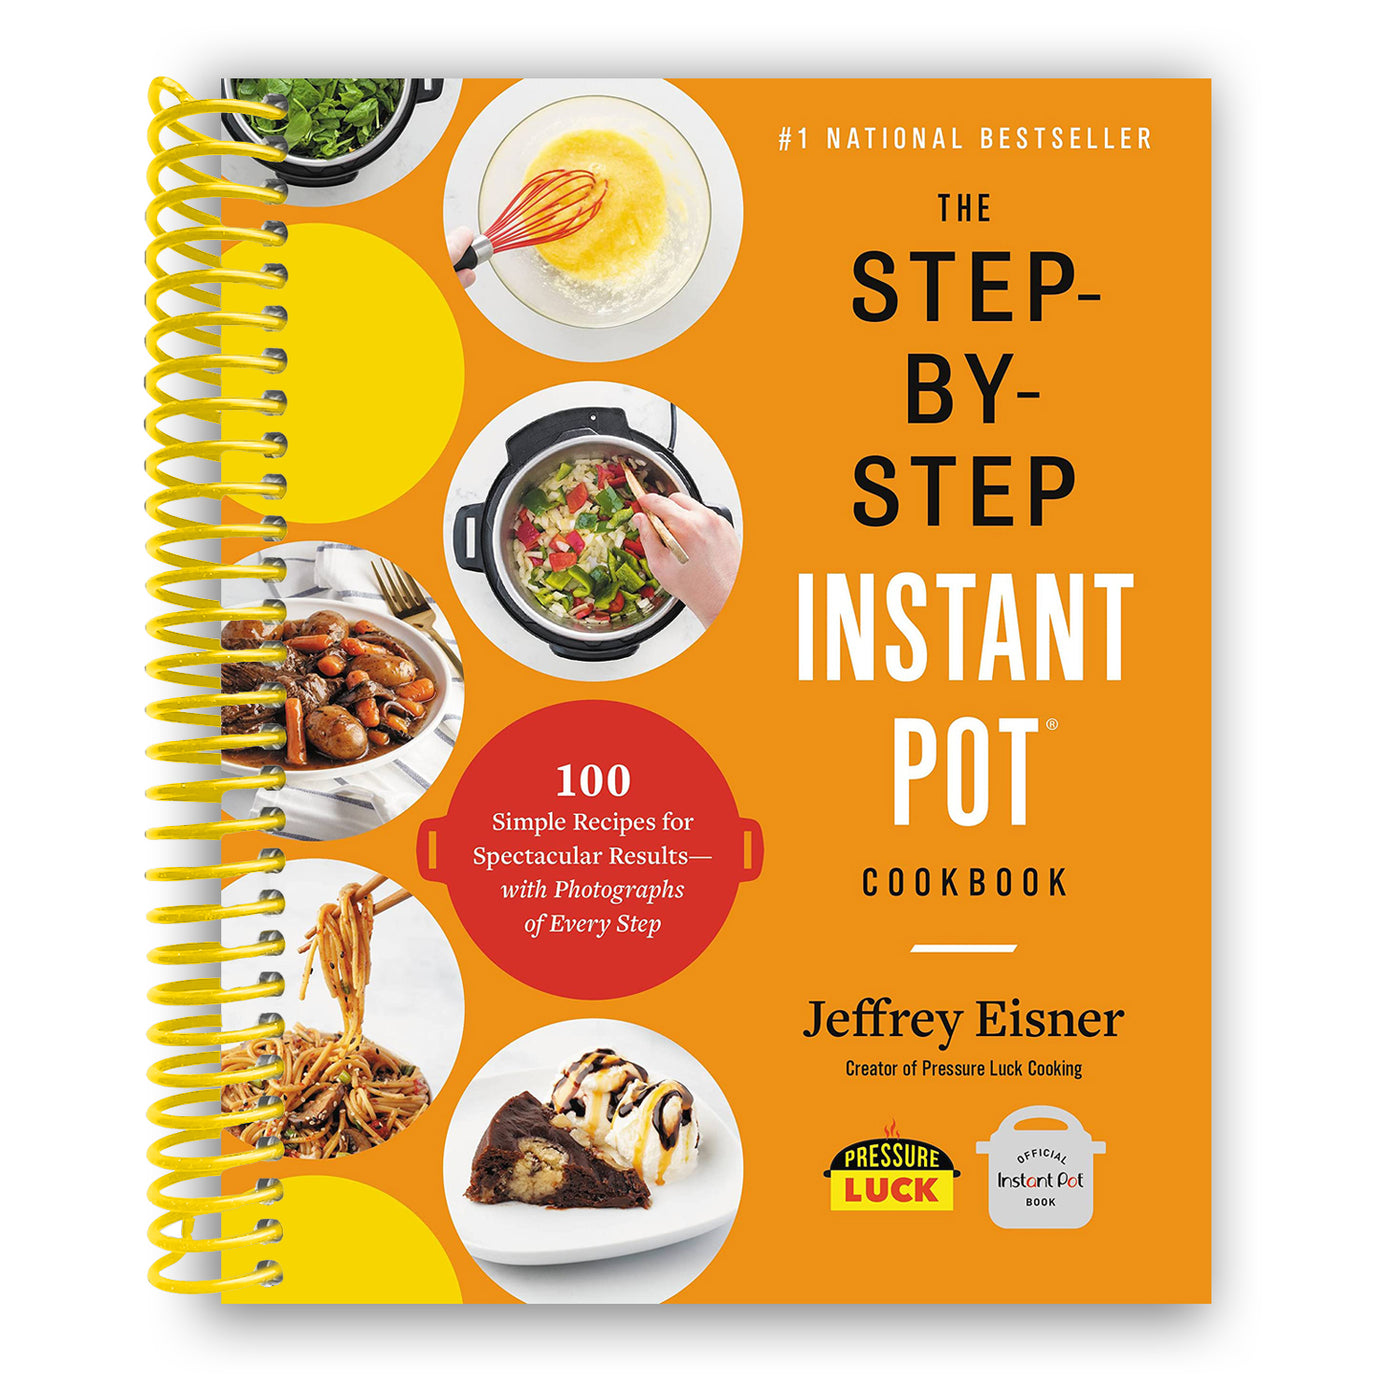 The Step-by-Step Instant Pot Cookbook: 100 Simple Recipes for Spectacular Results (Spiral Bound)